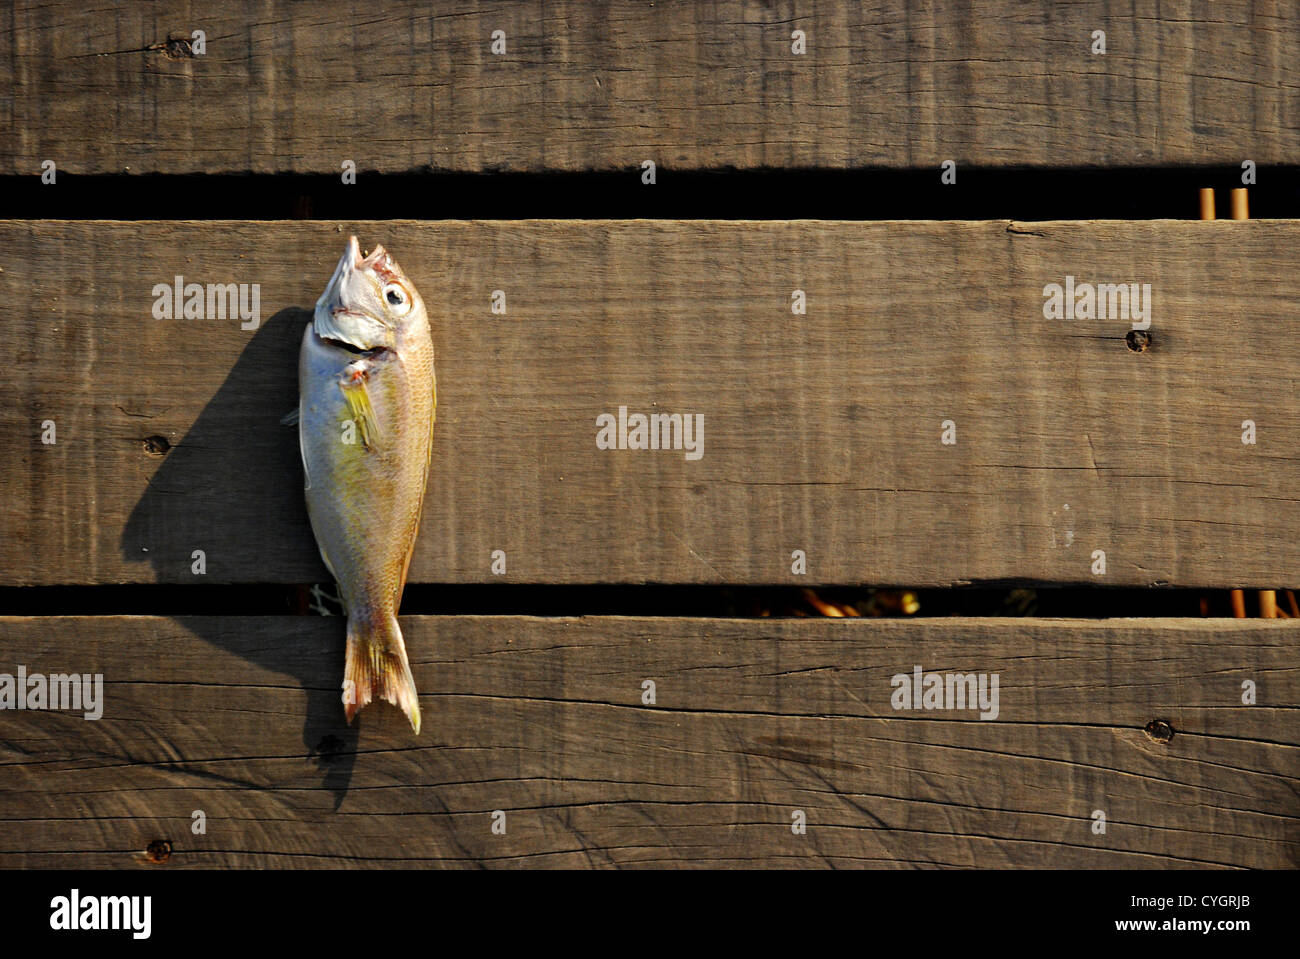 dead fish laid down on a wooden floor Stock Photo